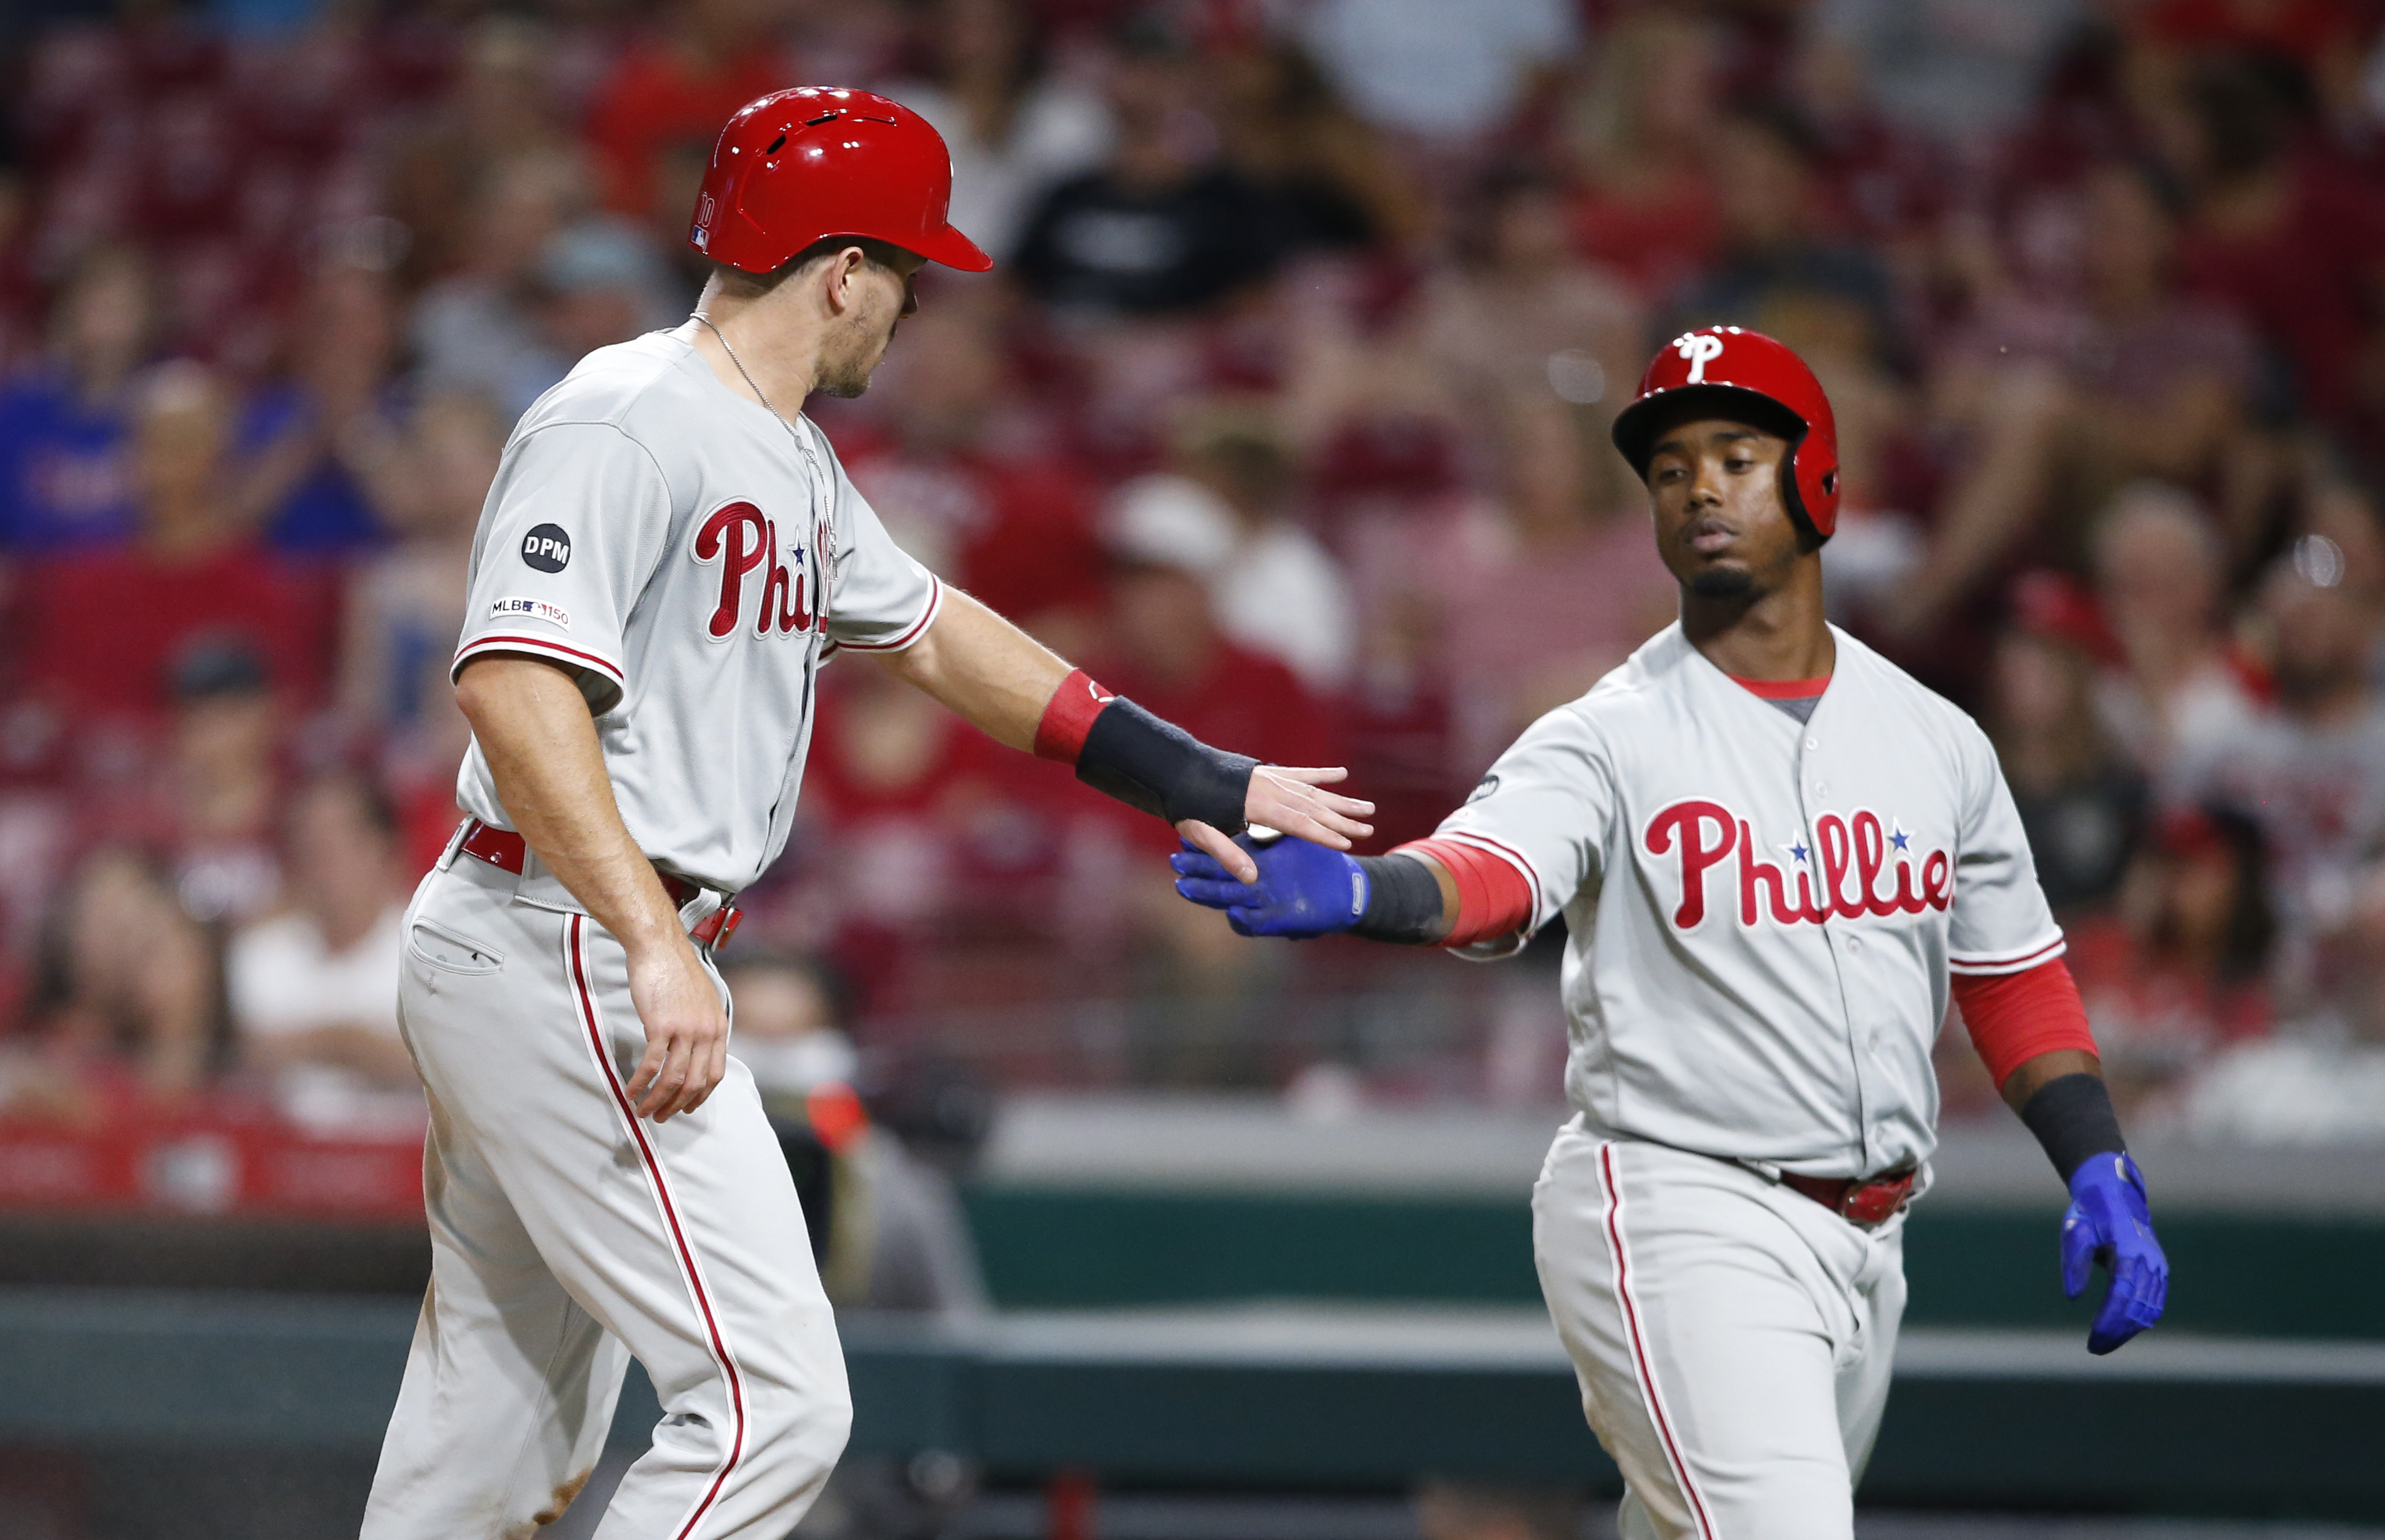 Bryce Harper drives in 100th run, Phillies beat Reds 6-2